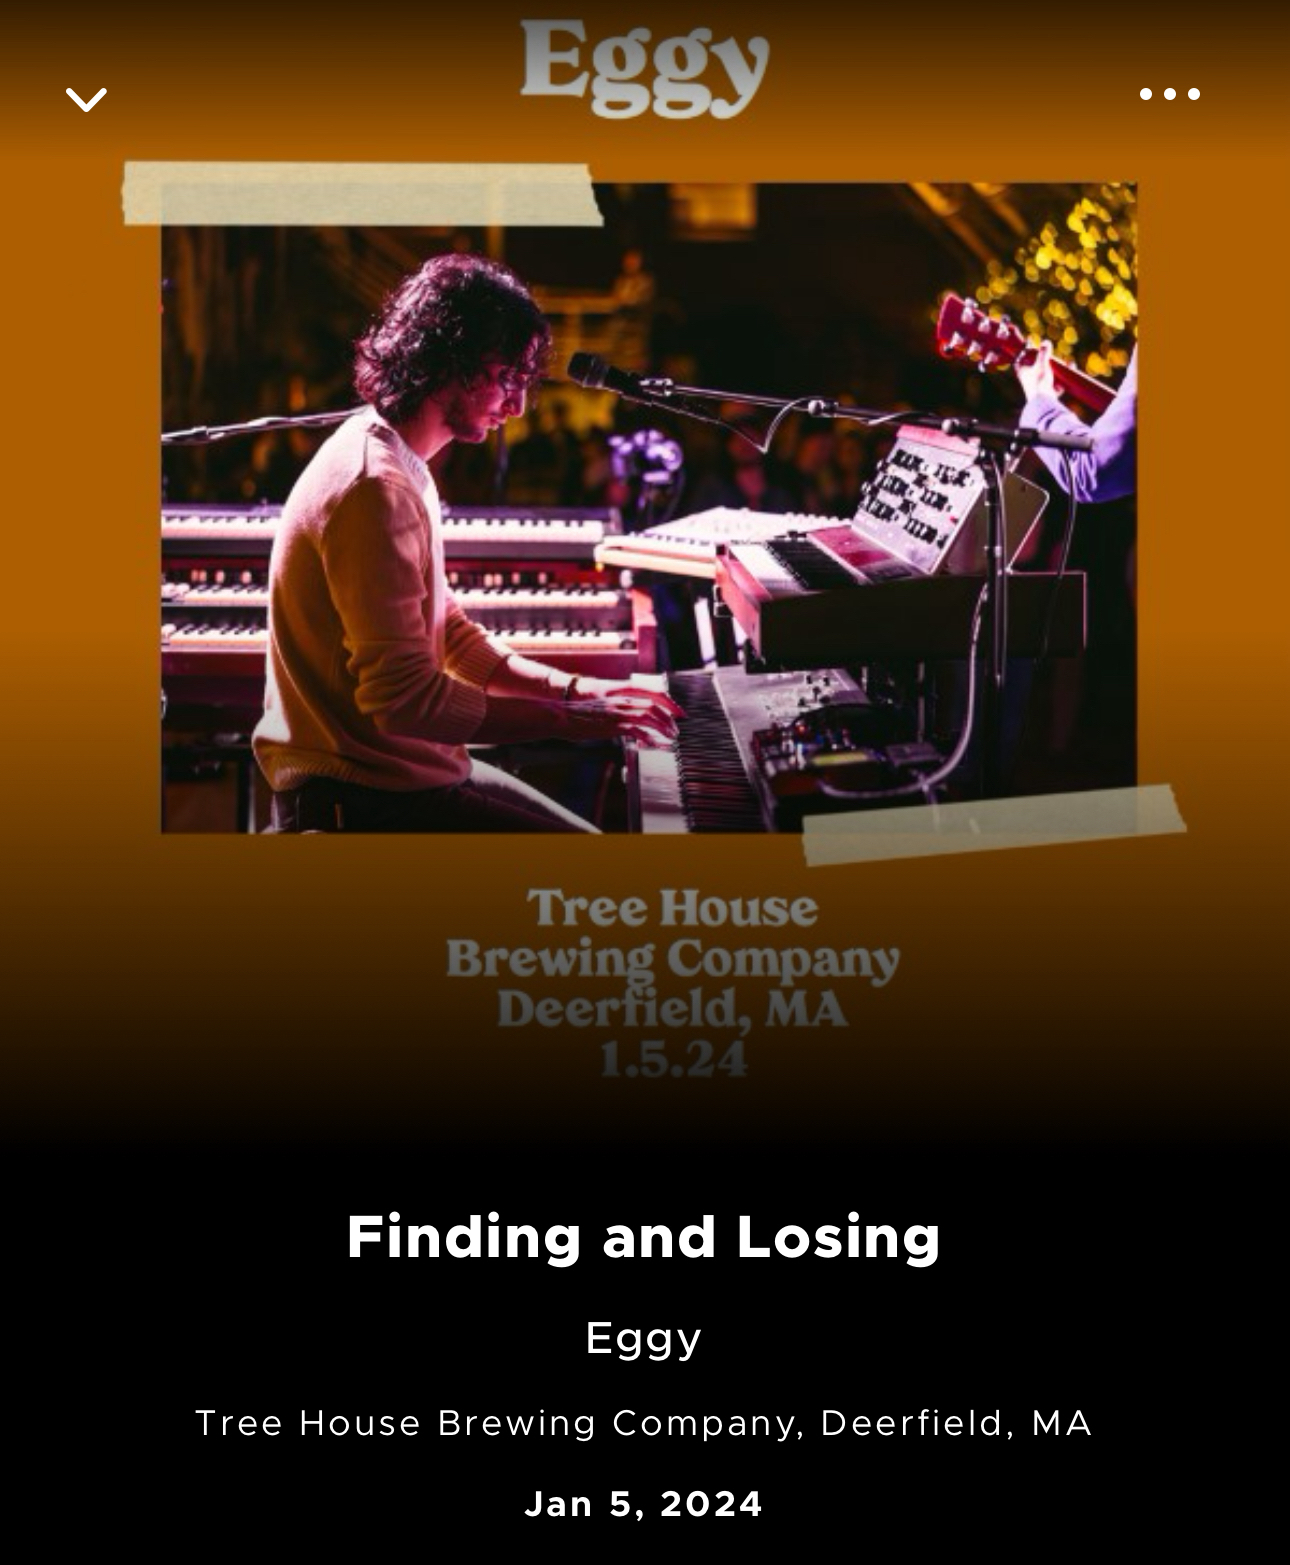 This image features two musicians performing on stage. The foreground shows a keyboardist focused on playing an electronic keyboard, while in the background a guitarist is seen holding a guitar. They both appear to be part of a live performance at Tree House Brewing Company in